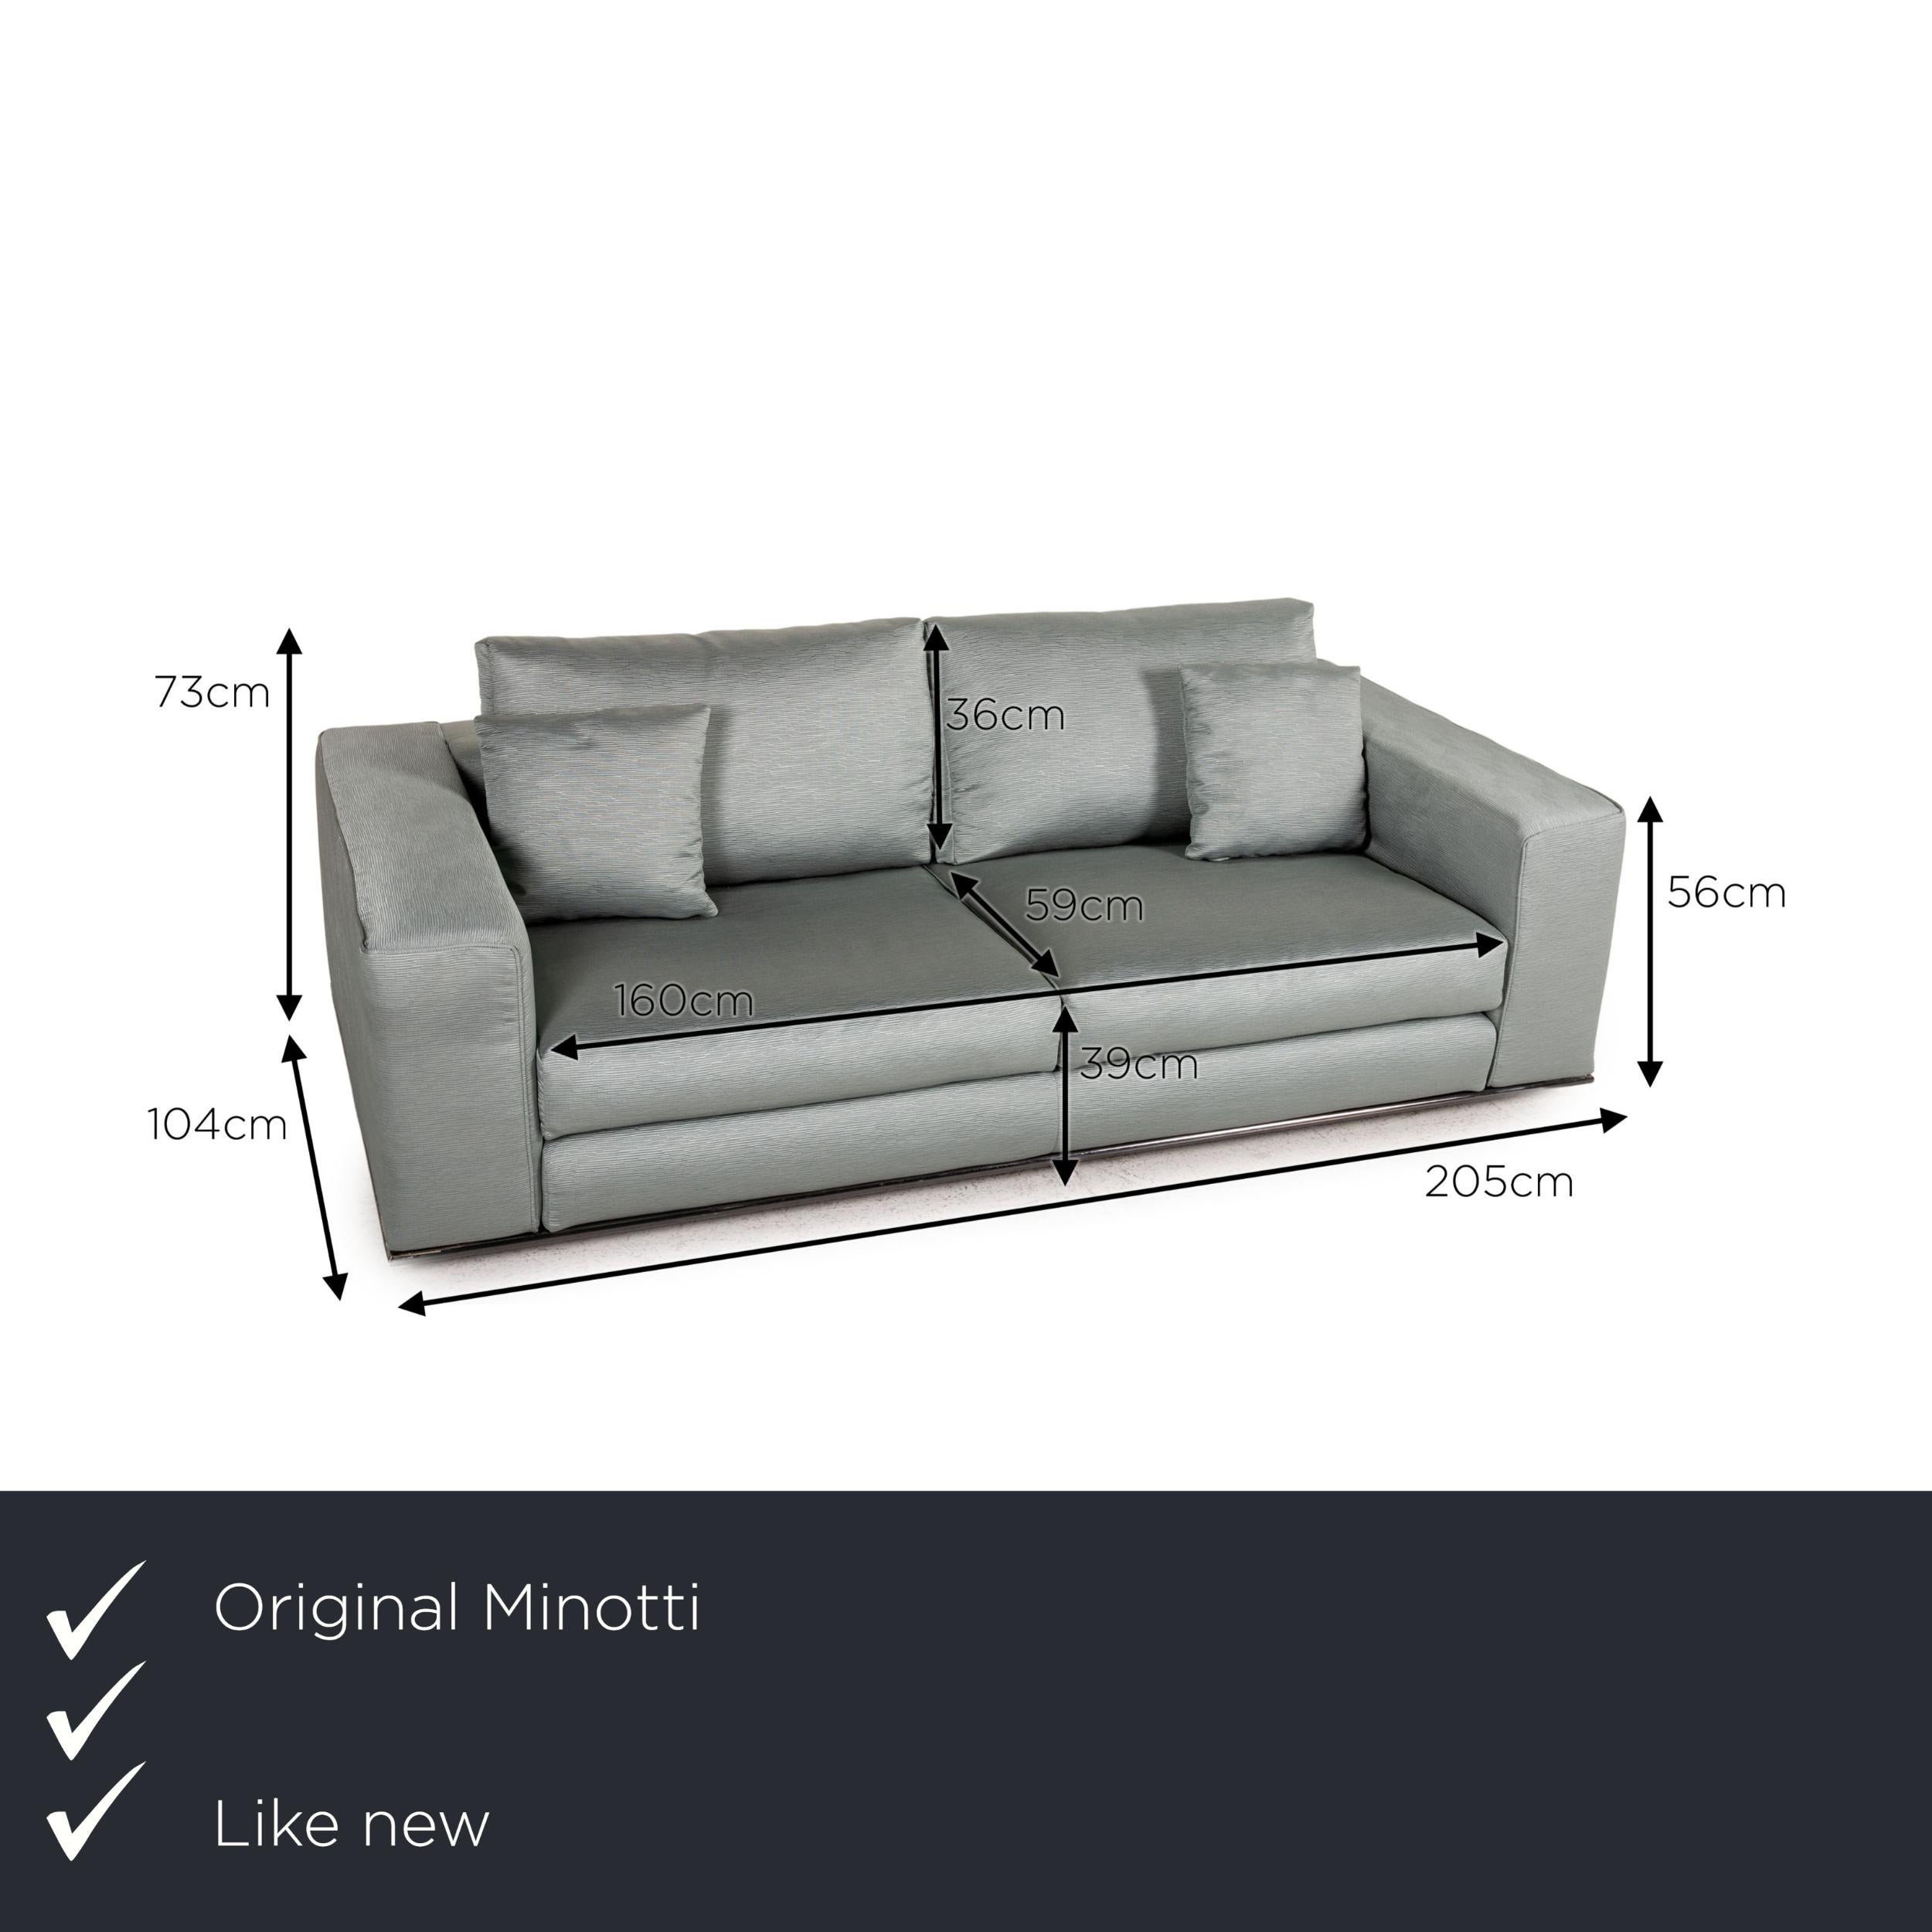 We present to you a Minotti Hamilton fabric sofa green two seater couch.
 
 

 Product measurements in centimeters:
 

 depth: 104
 width: 205
 height: 73
 seat height: 39
 rest height: 56
 seat depth: 59
 seat width: 160
 back height: